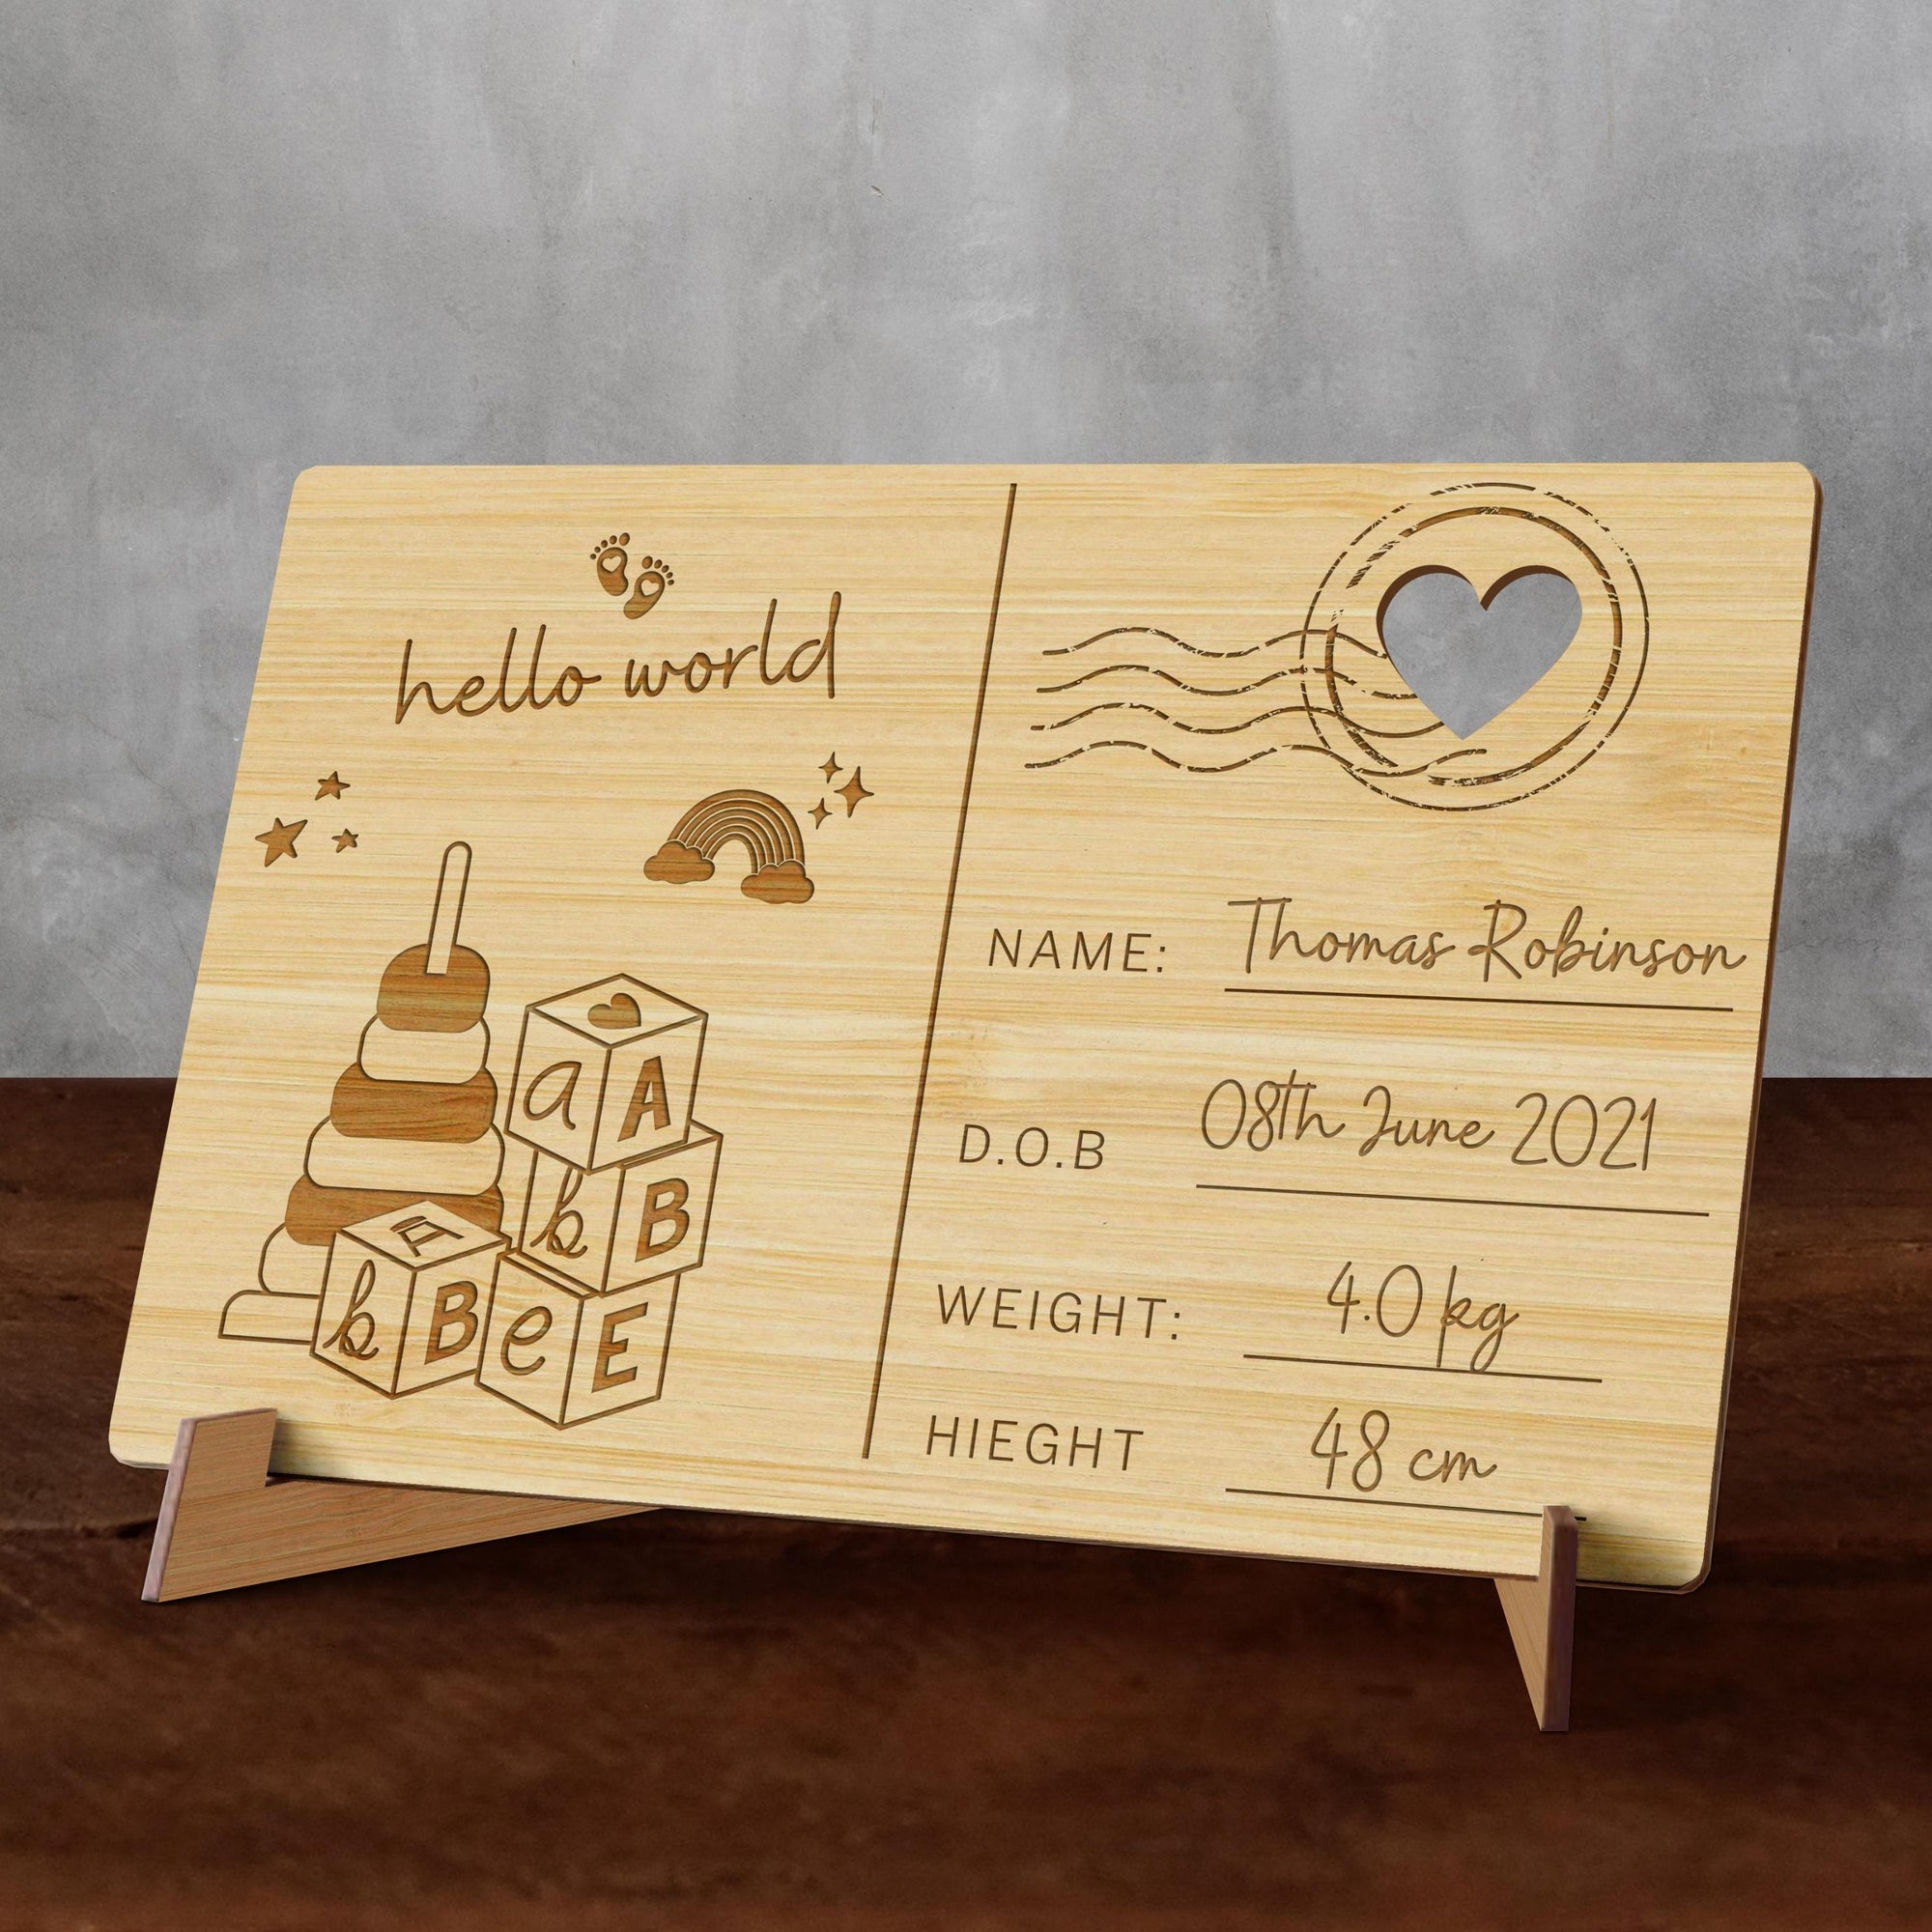 Personalised Wooden Birth Announcement Postcard, Engraved Name, Message Introducing New Baby Arrival &amp; Display Stand, Newborn Keepsake Gift